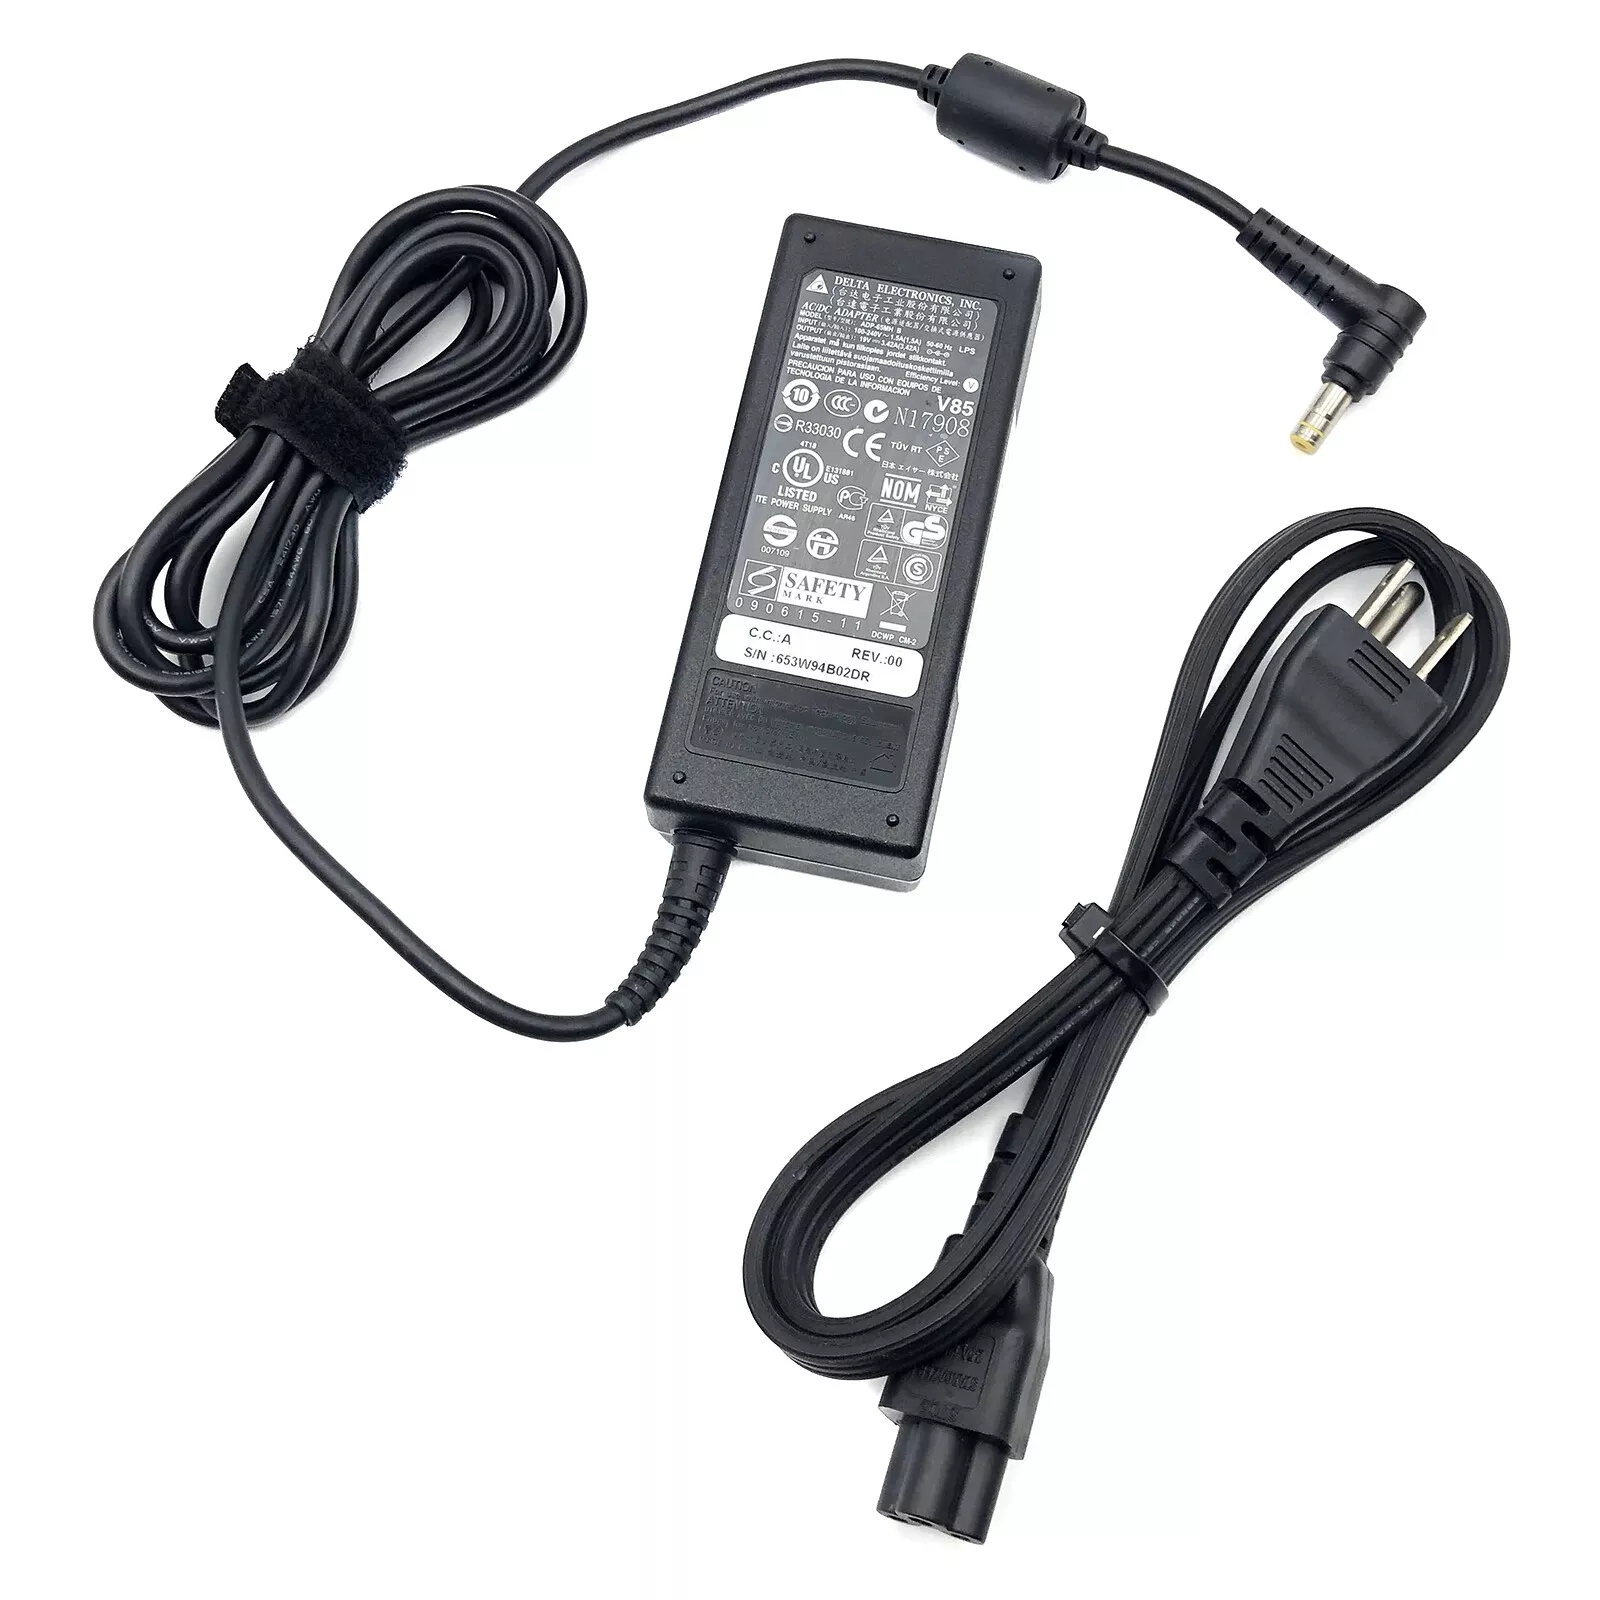 *Brand NEW*Genuine Delta 19V 3.42A 65W AC Adapter ADP-65MH B Power Supply - Click Image to Close